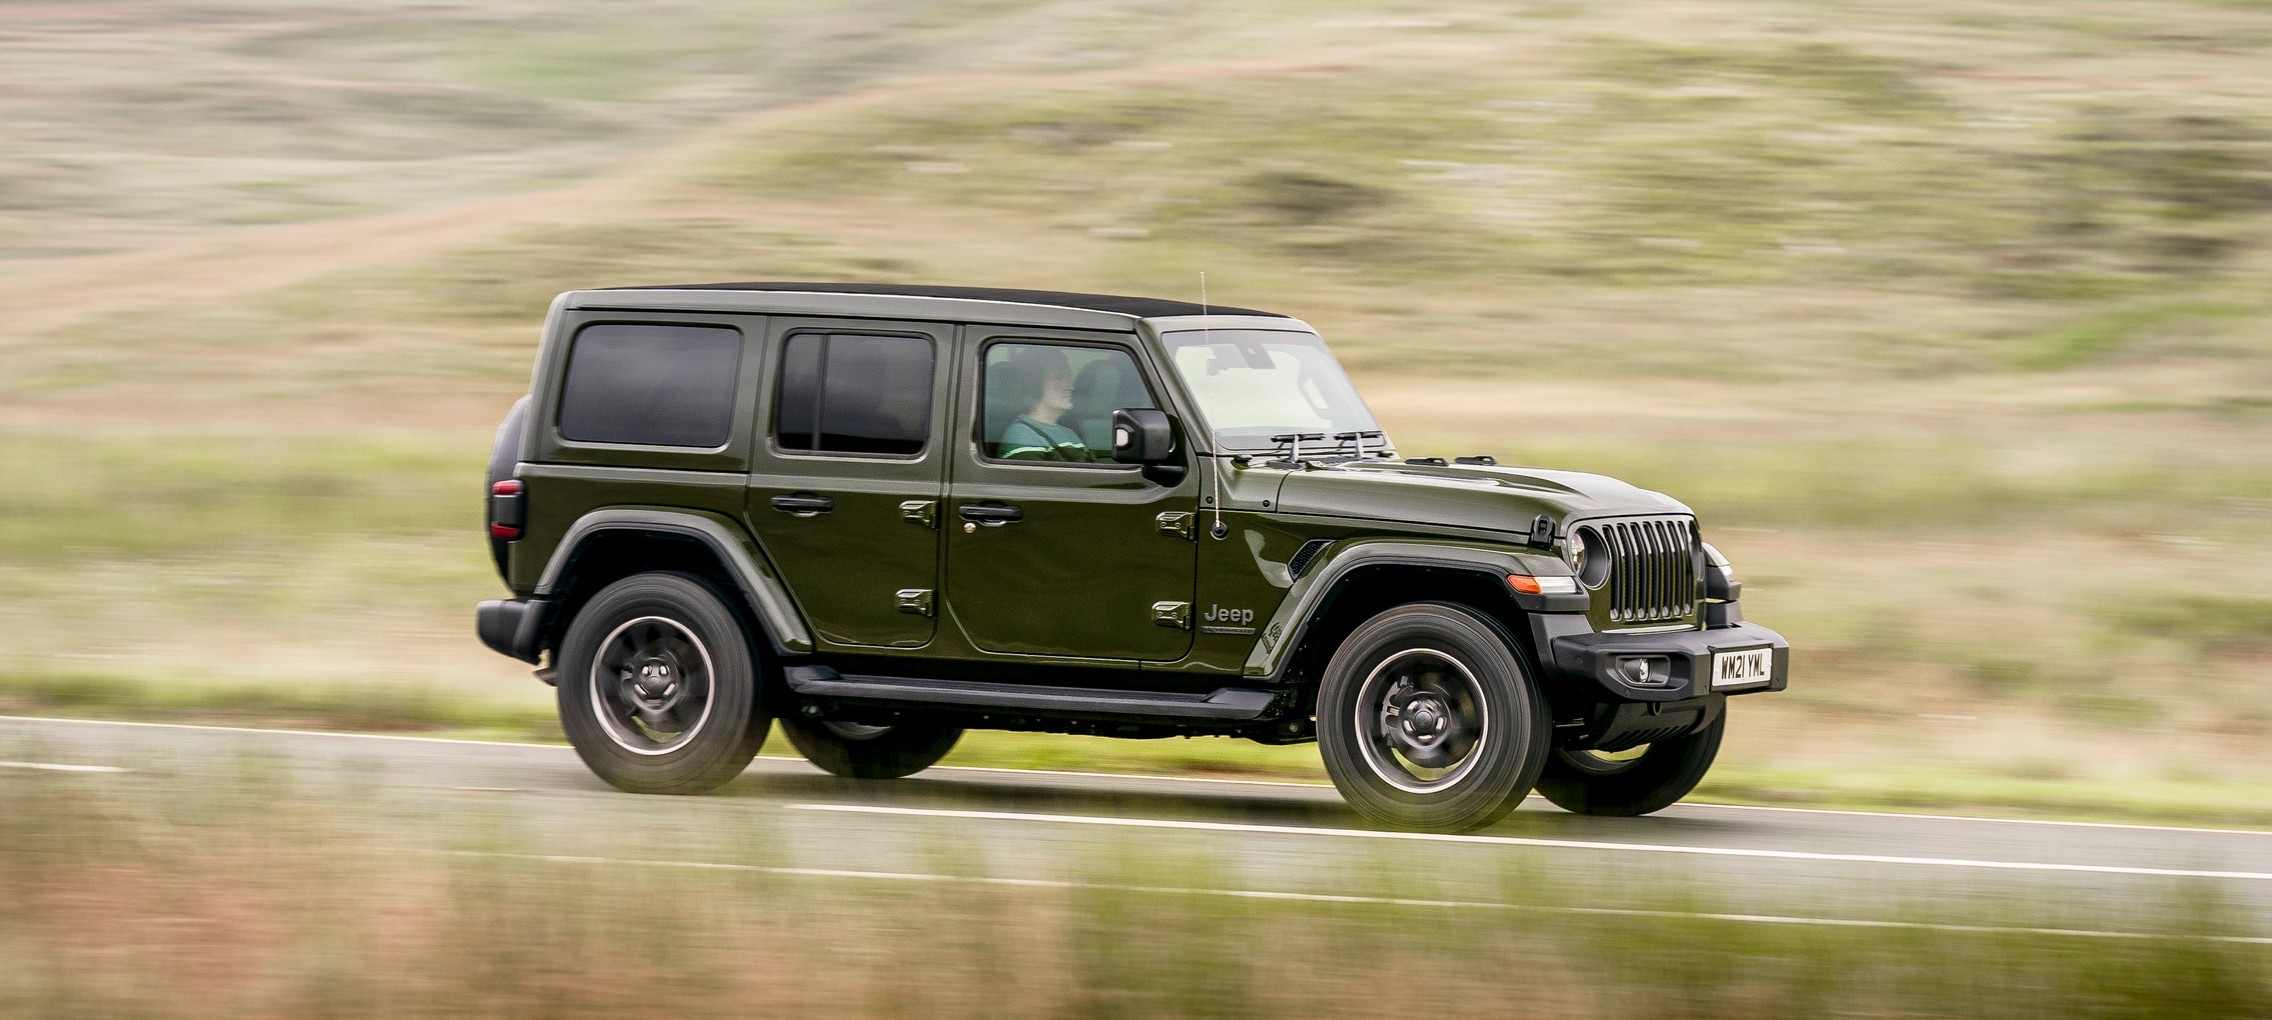 2021 Jeep Wrangler Hits UK With Range of New Colors and £49,450 Starting  Price - autoevolution